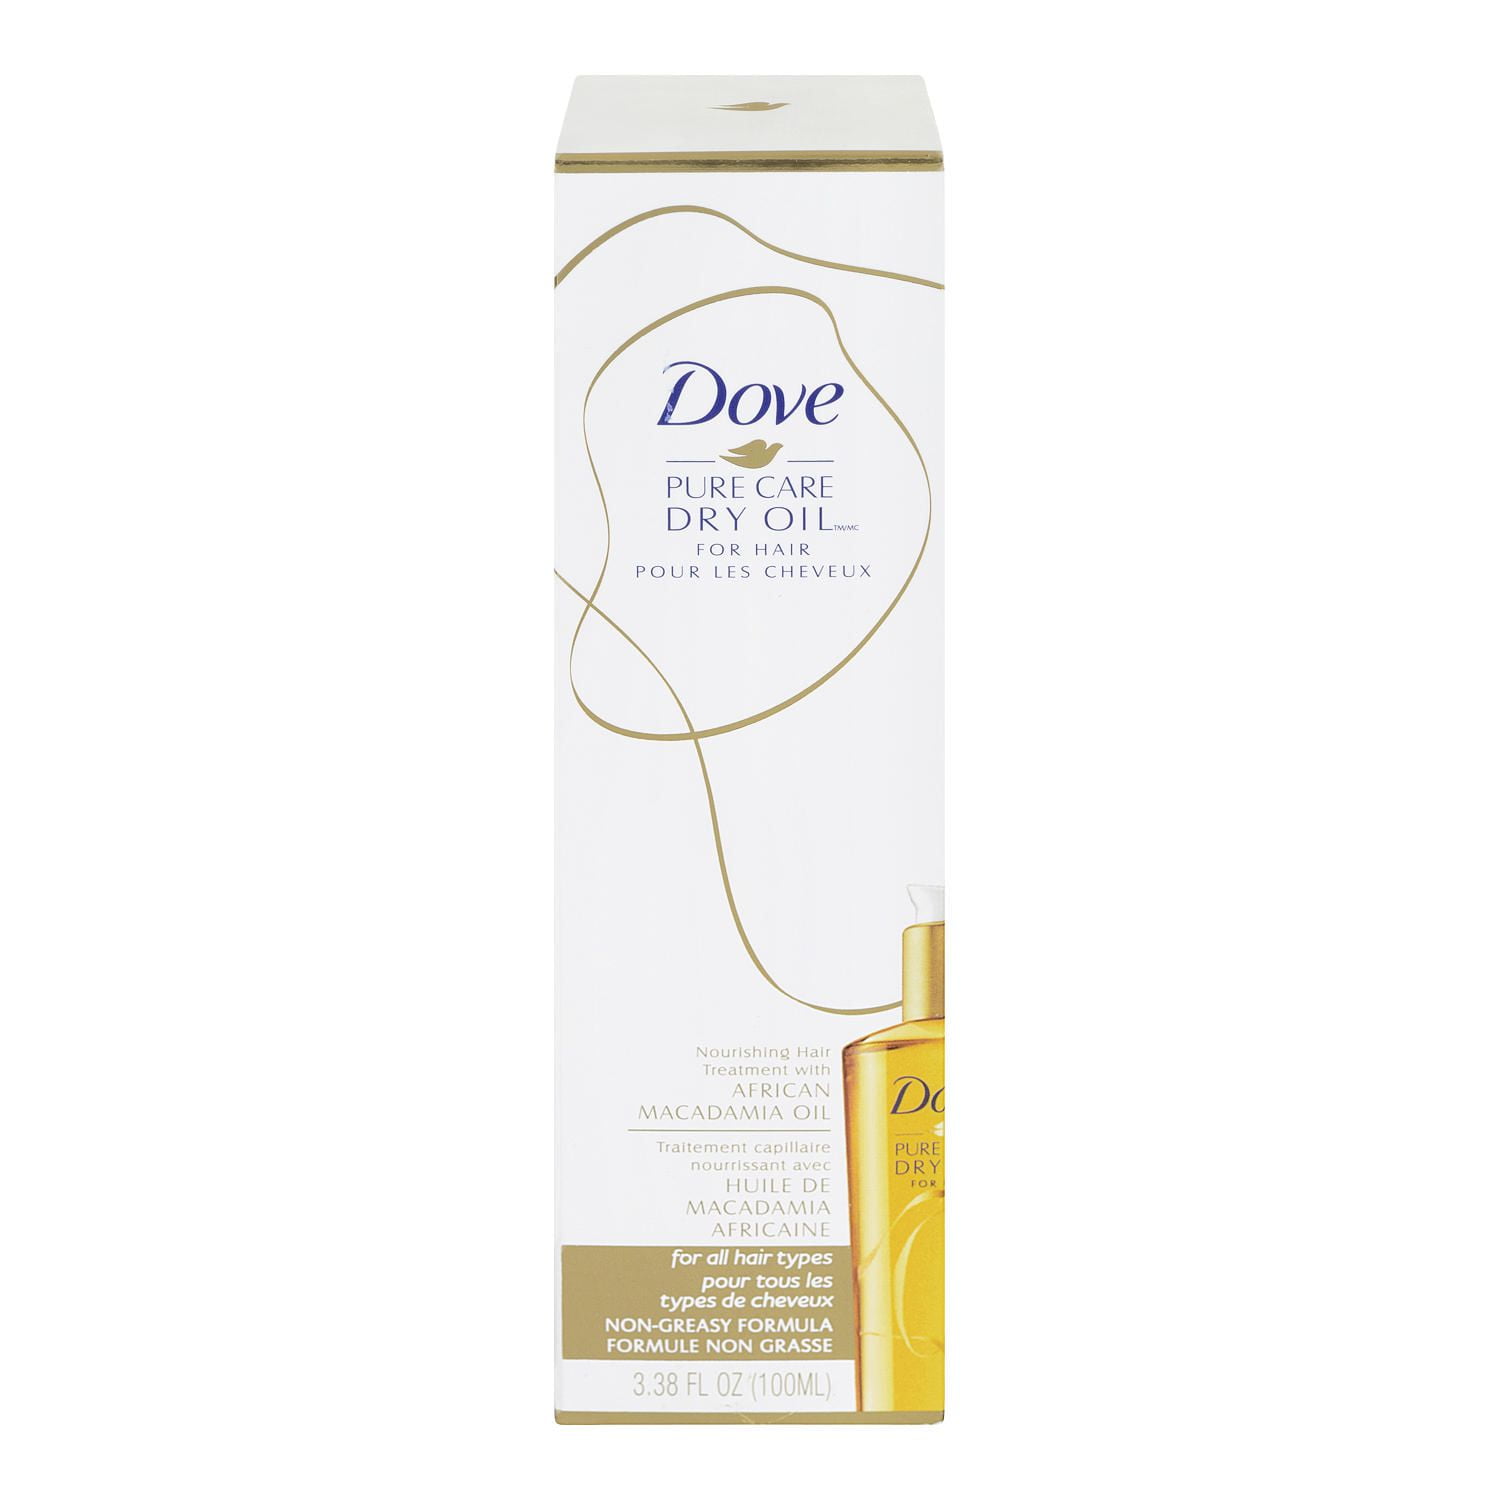 Dove Pure Care Dry Oil Nourishing Hair Treatment with African Macadamia Oil  reviews in Hair Serum - ChickAdvisor